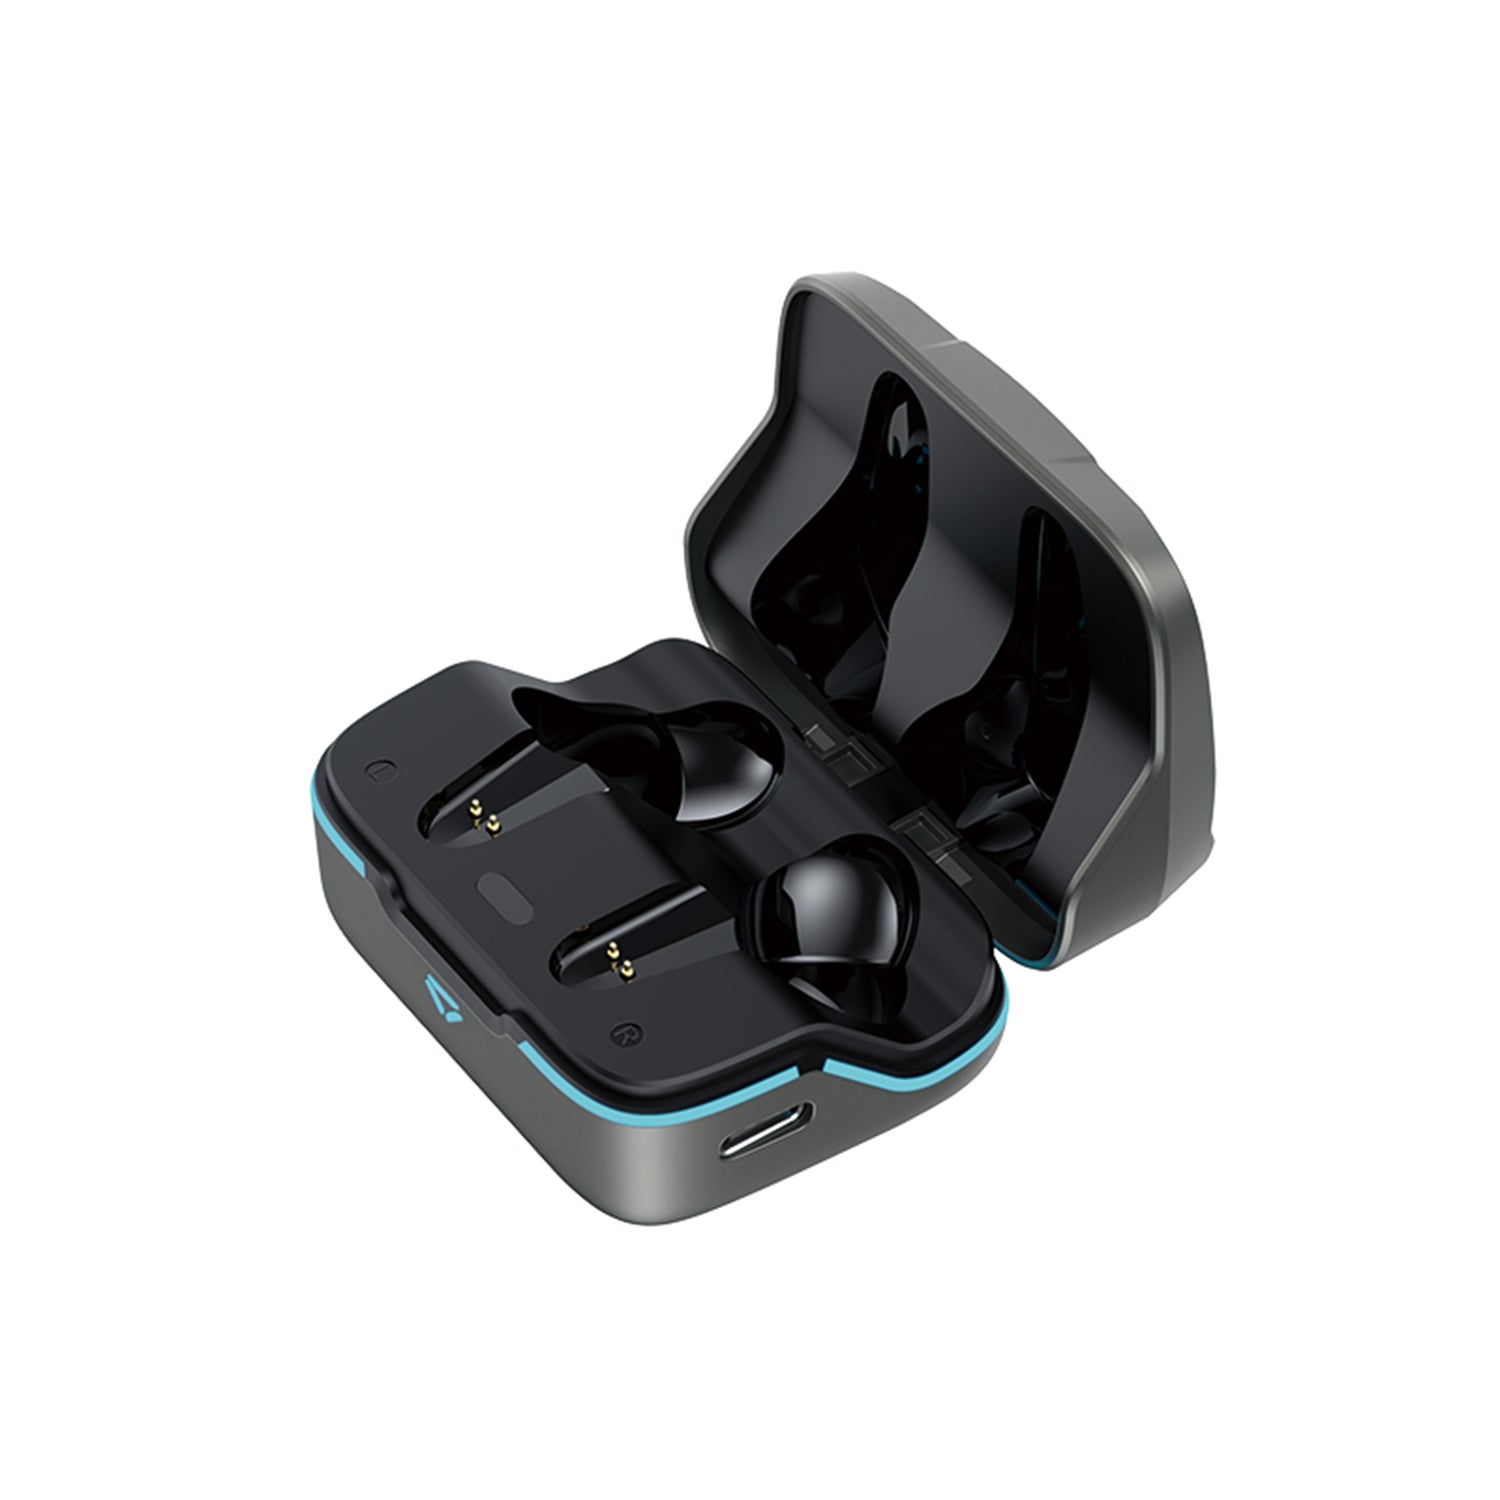 HAVIT TW952 Stereo True Wireless Earbuds with Gaming Music Dual Mode, Full Range Audio & LED Light